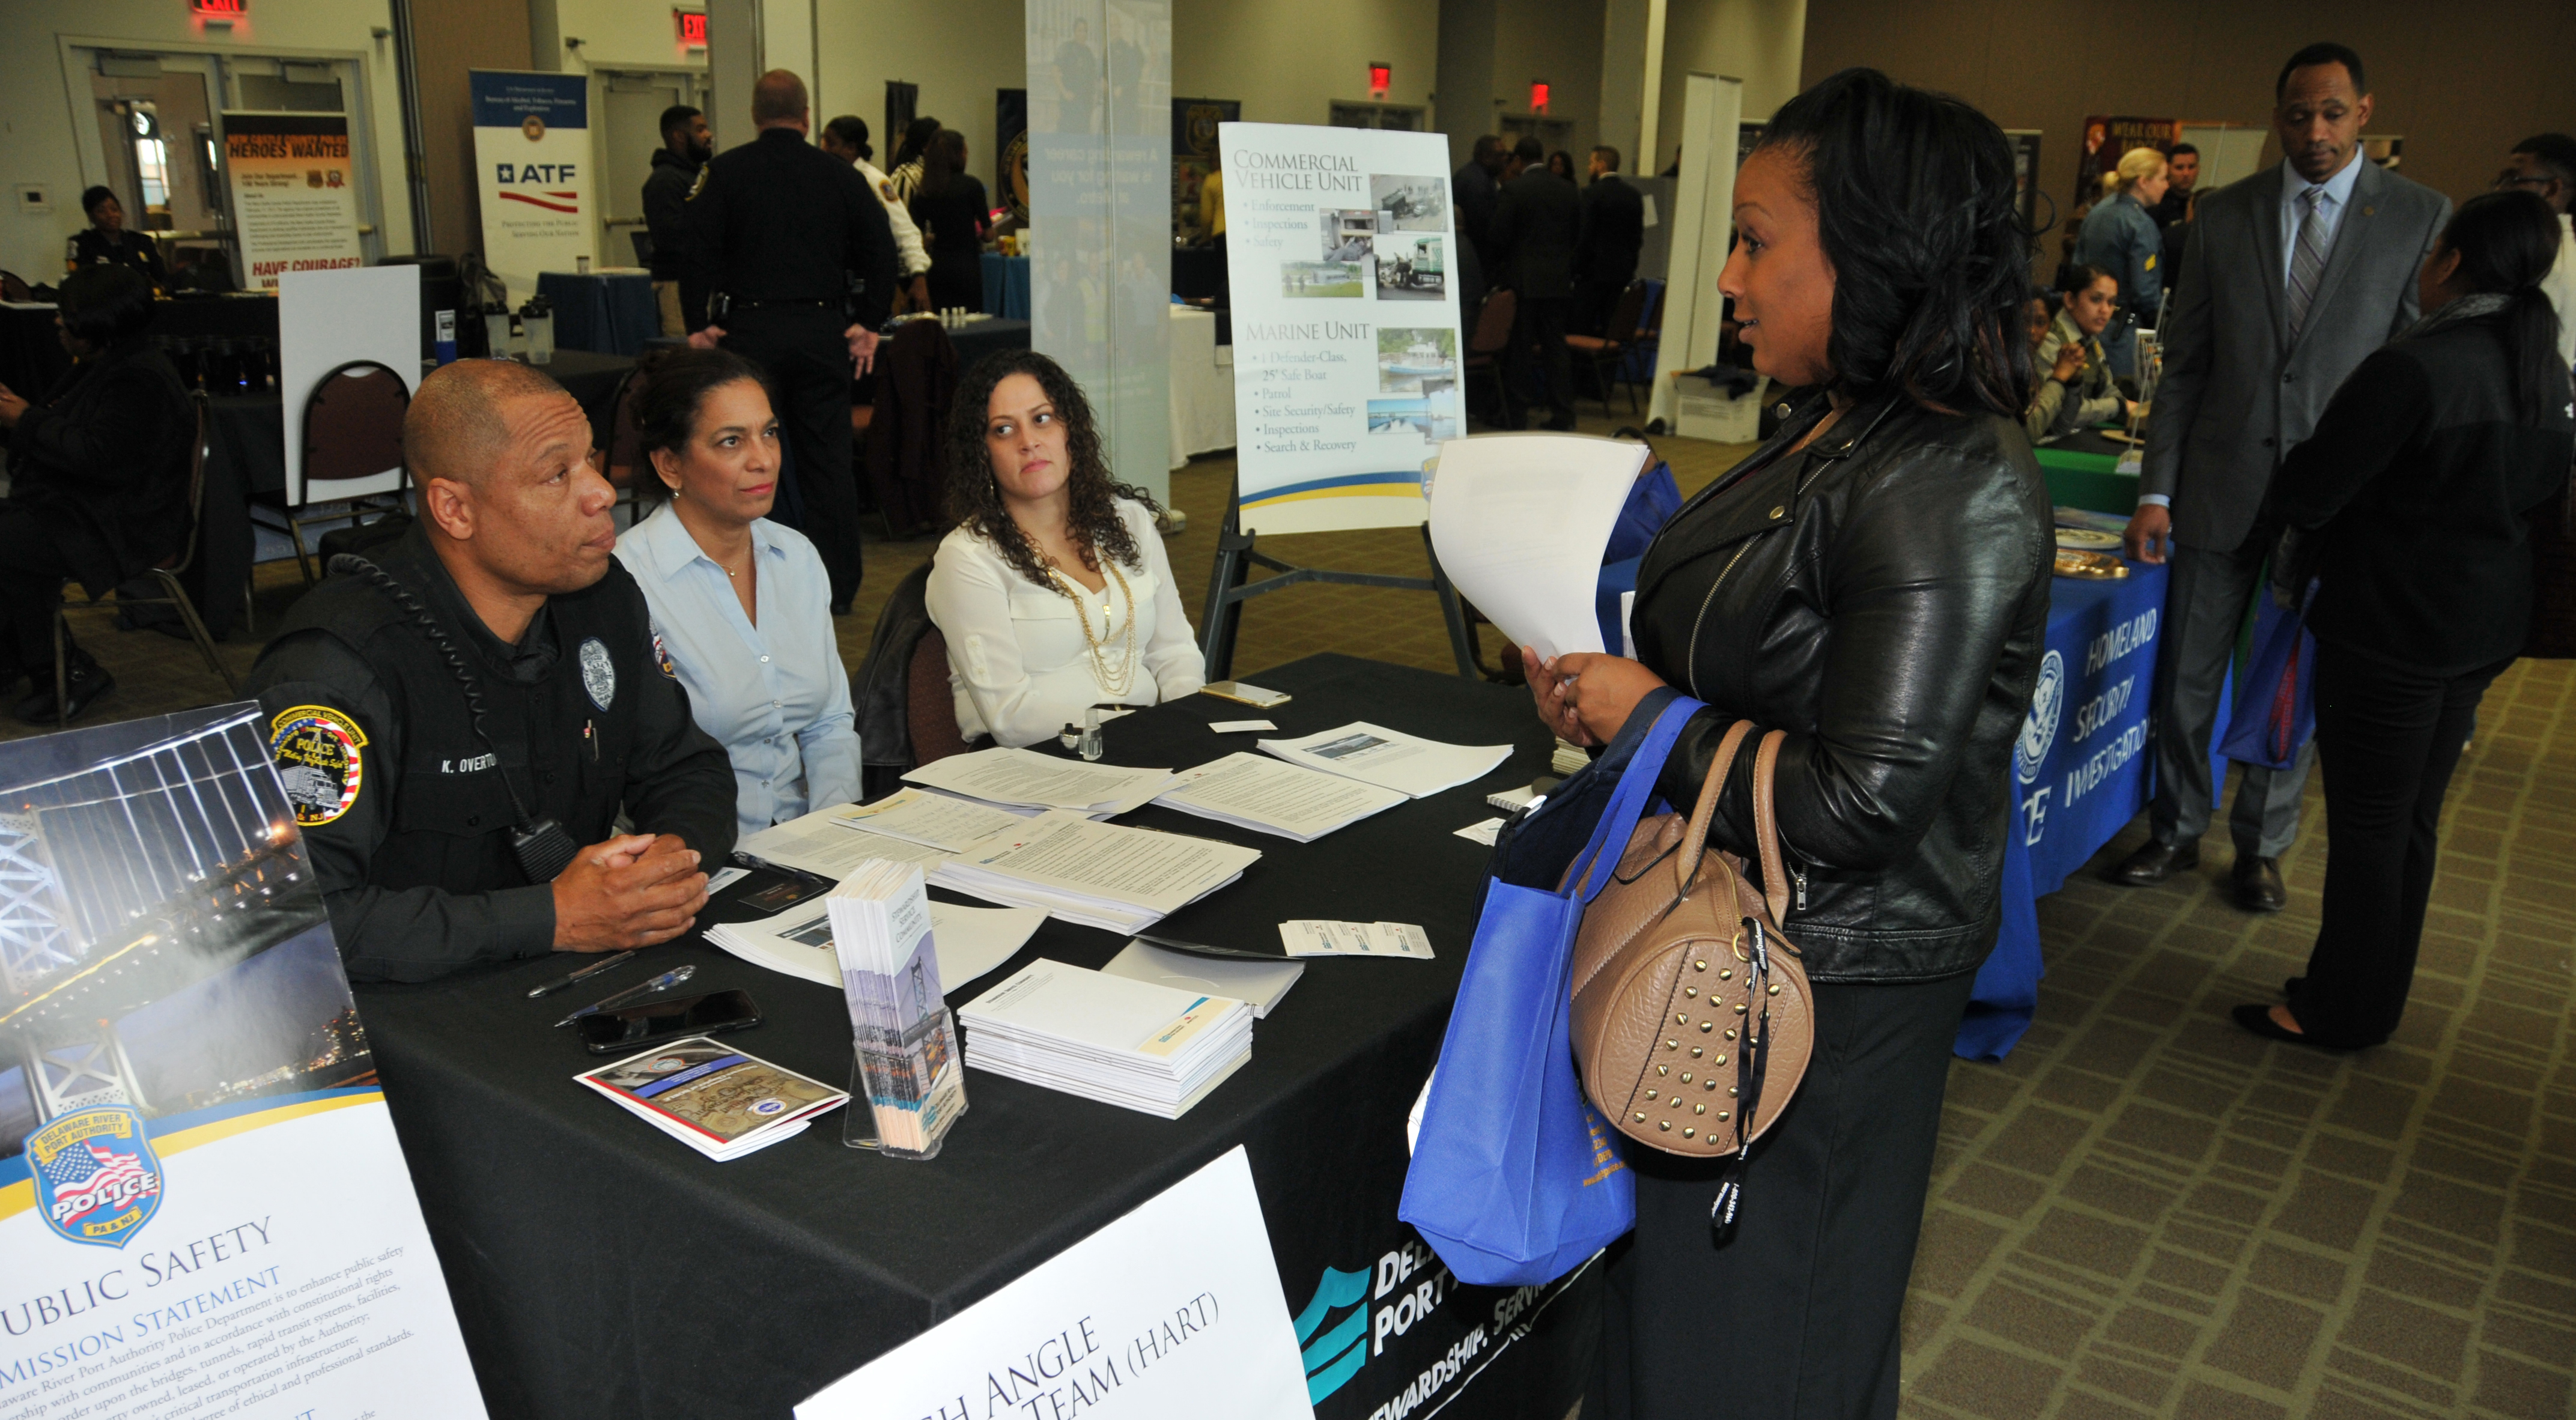 An attendee of the NOBLE Career Fair get some information from the Delaware River and Port Authority representatives.